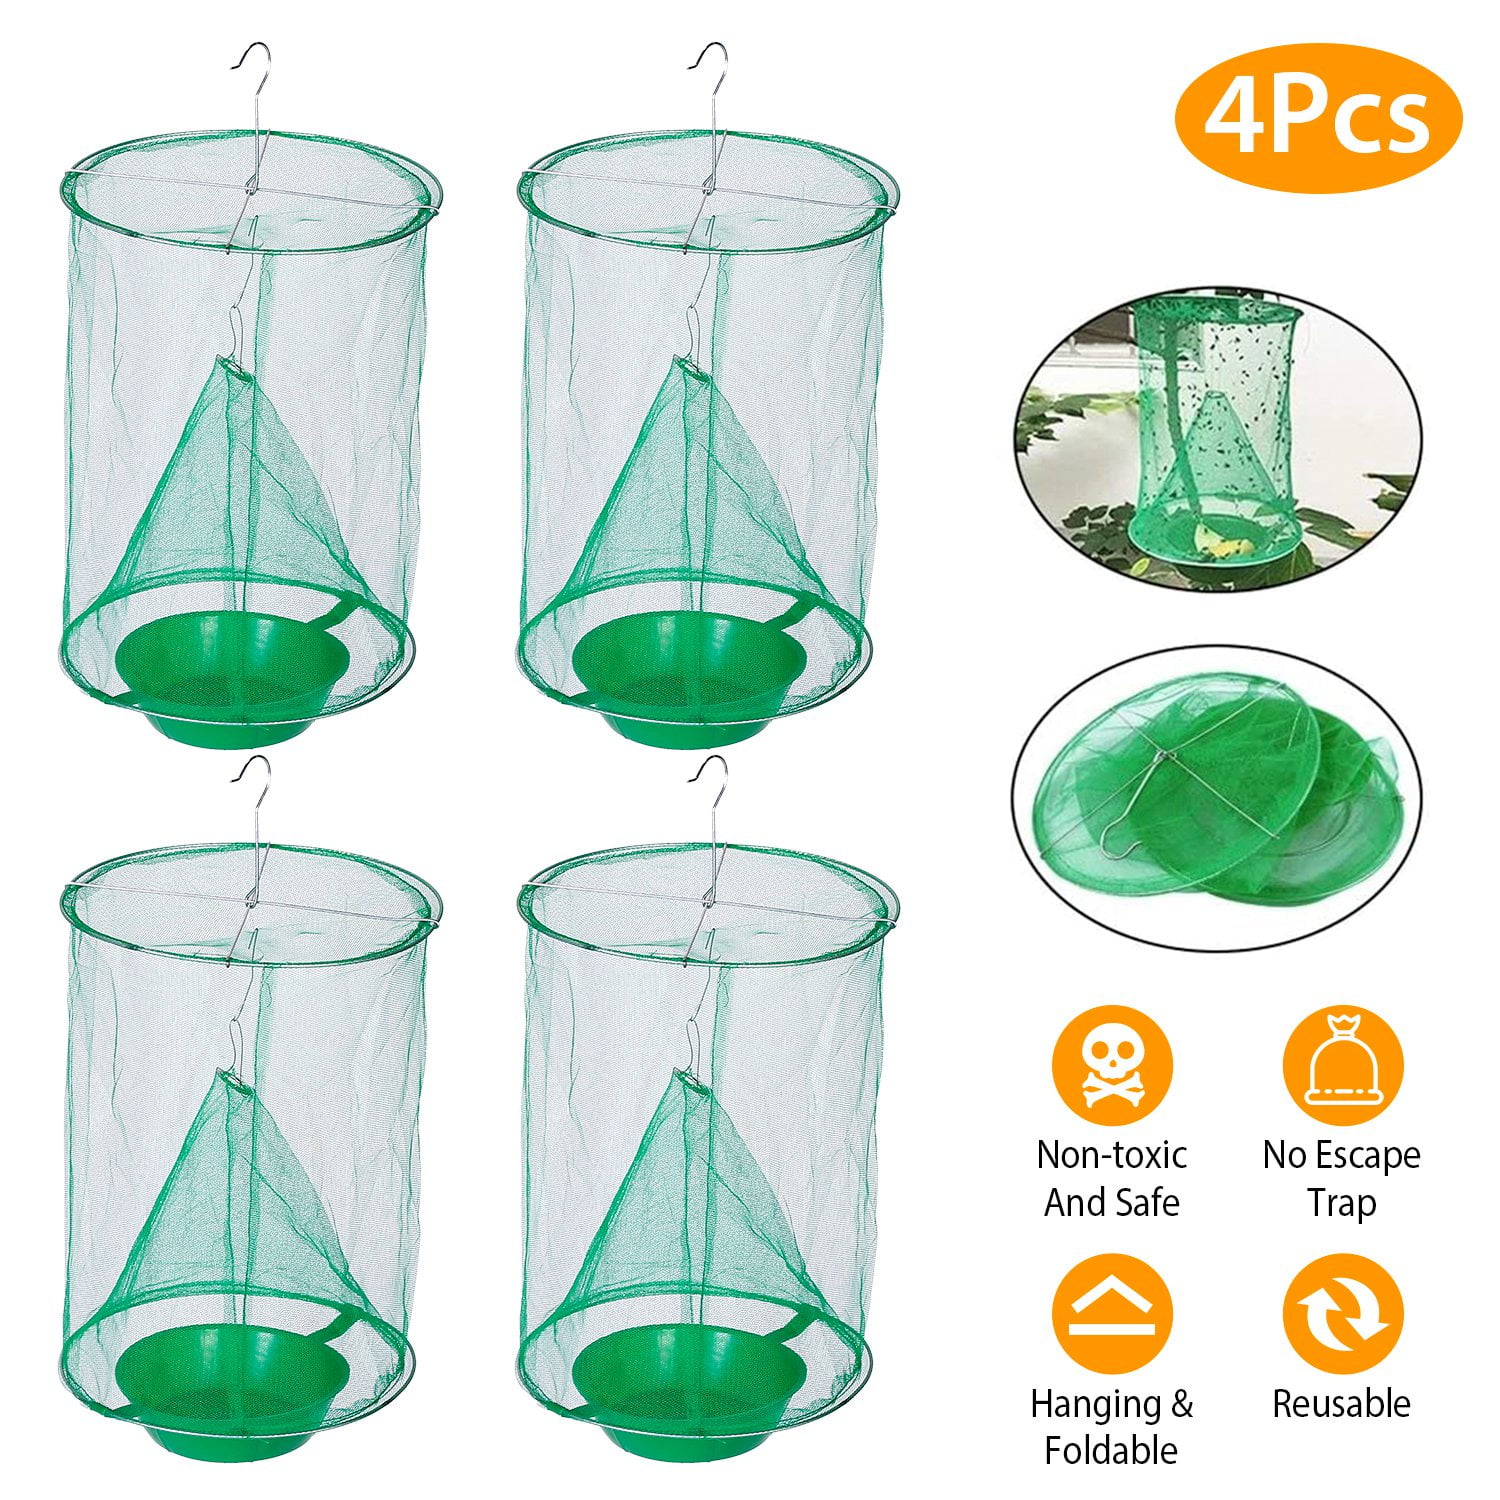 Reusable Insect Killer Net Fly Trap Cage Trap Outdoor Ranch Pest Hanging Catcher 